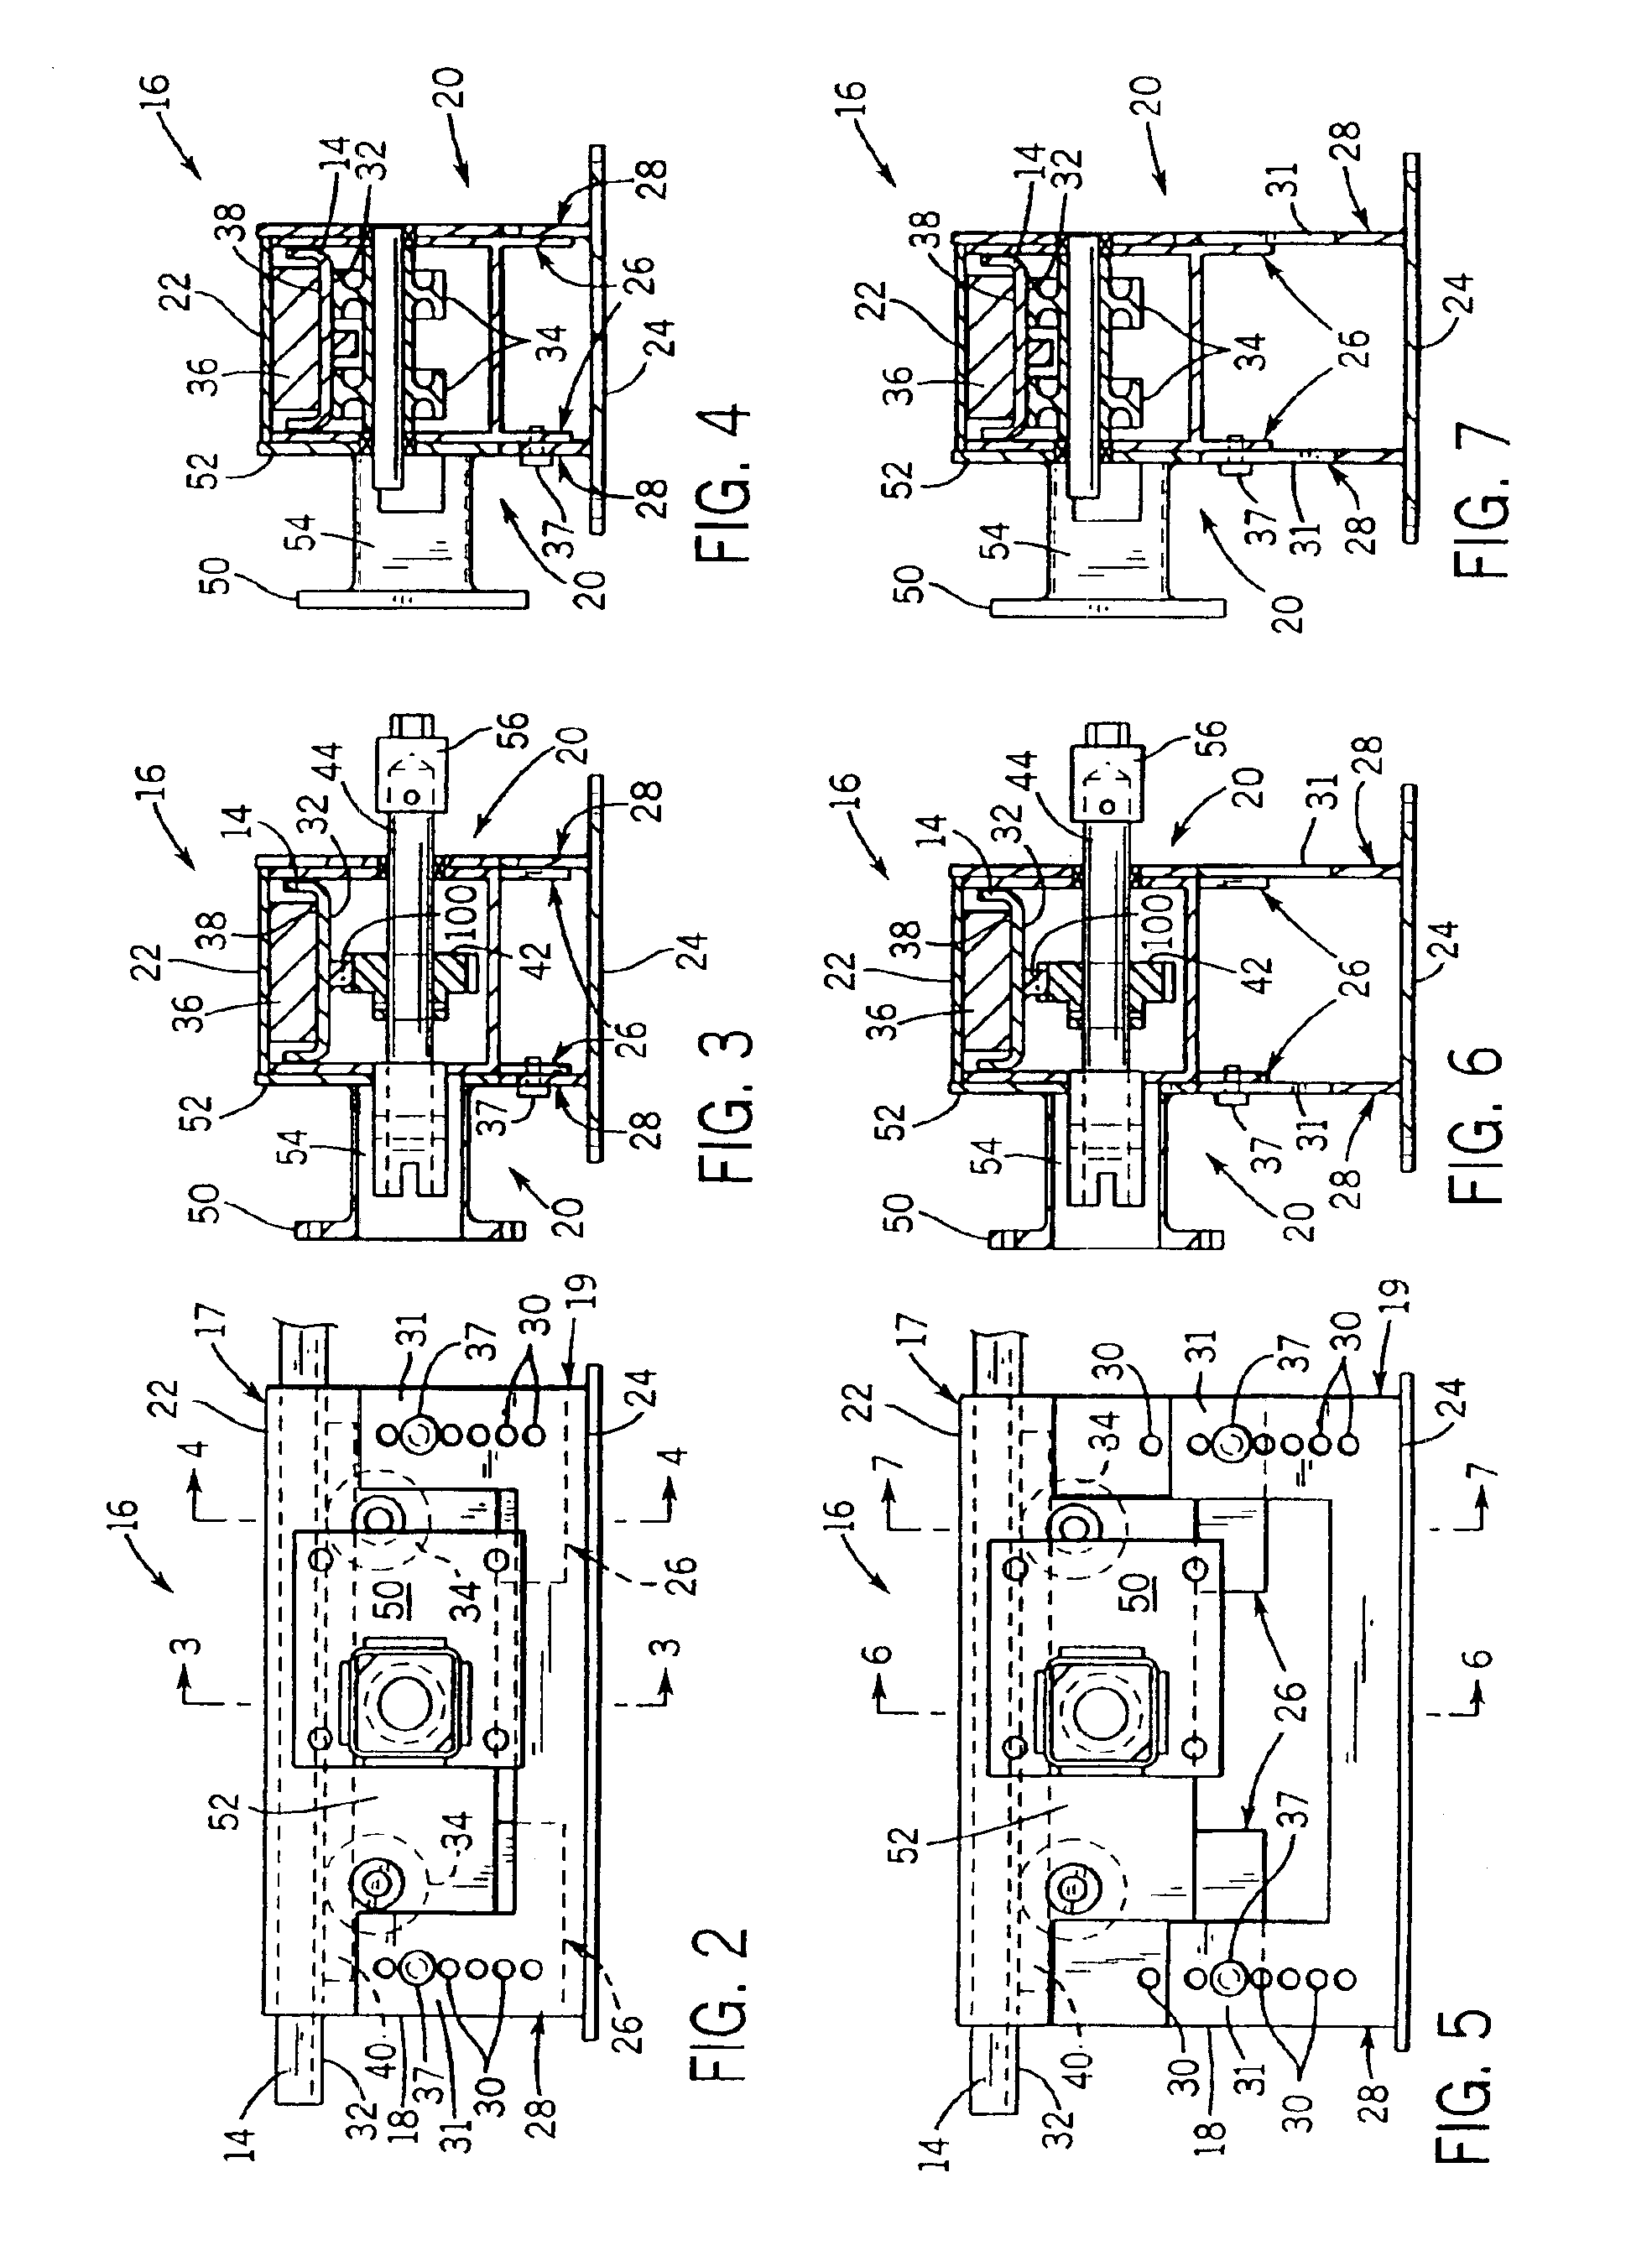 Variable height slide-out mechanism